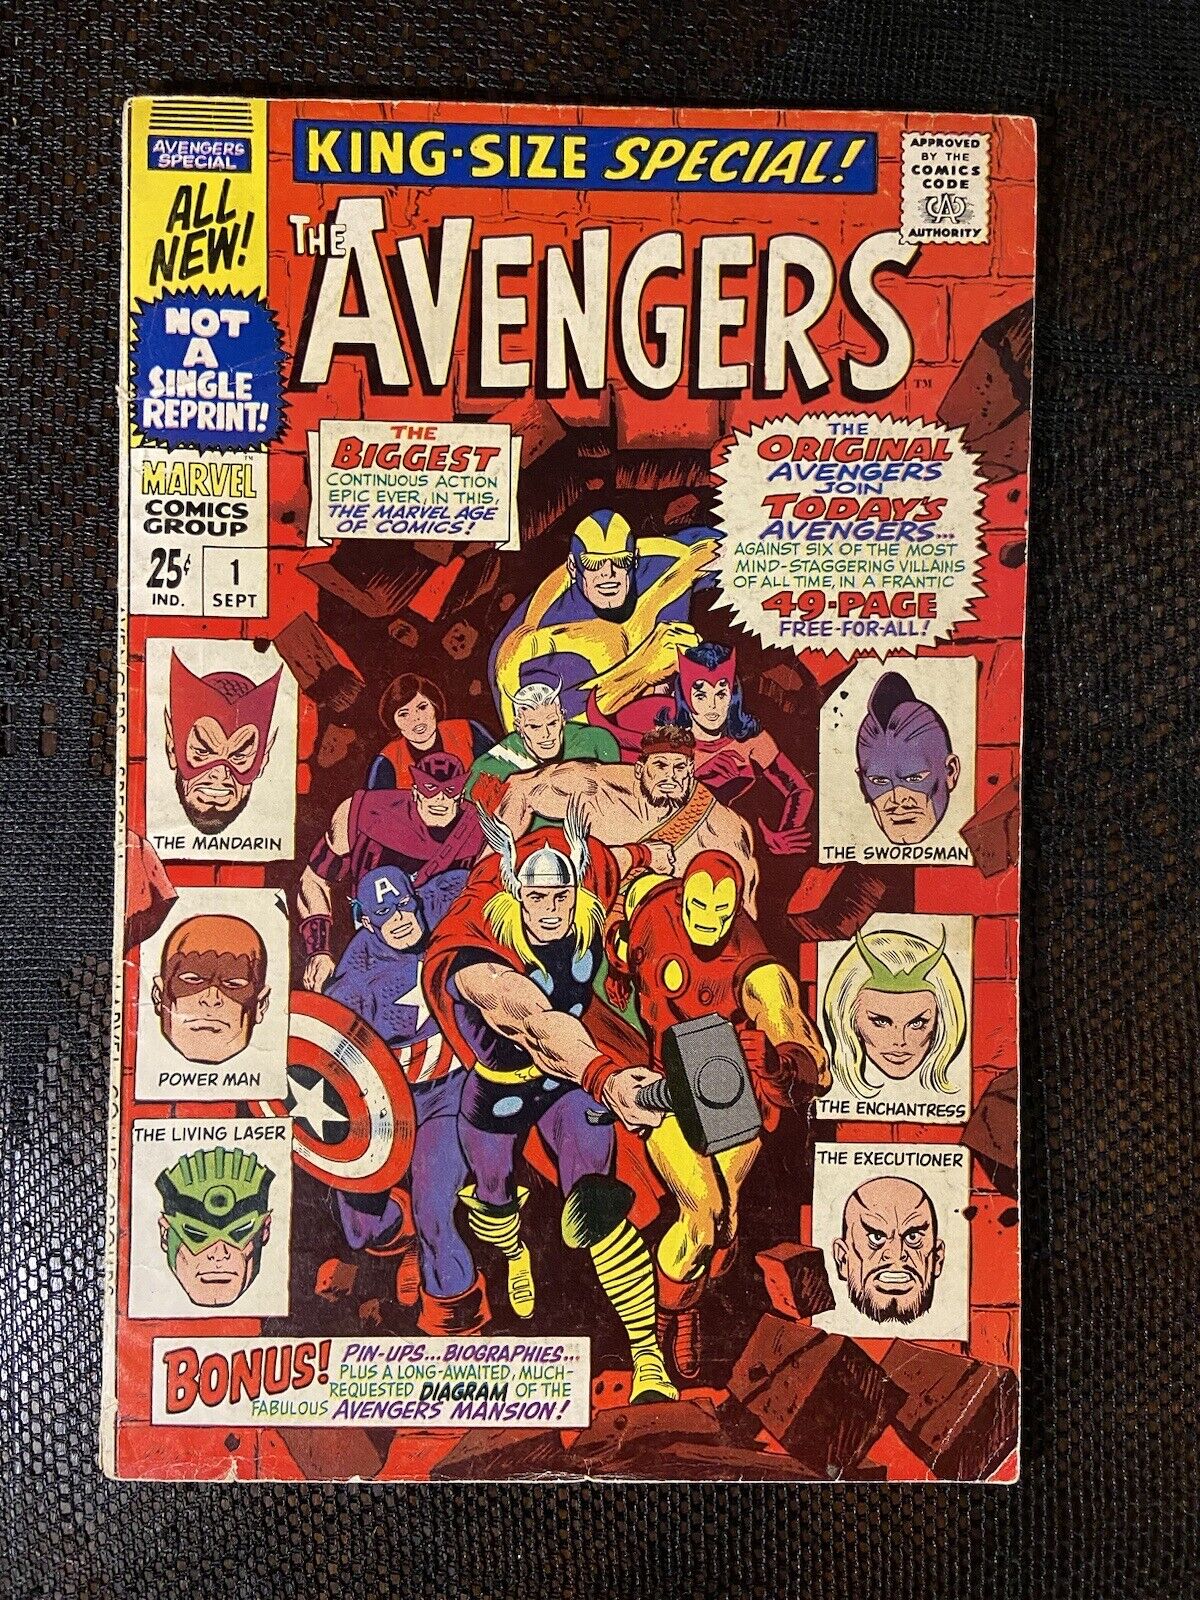 AVENGERS ANNUAL #1 (1967) KING SIZE SPECIAL SILVER AGE MARVEL AVENGERS KEY